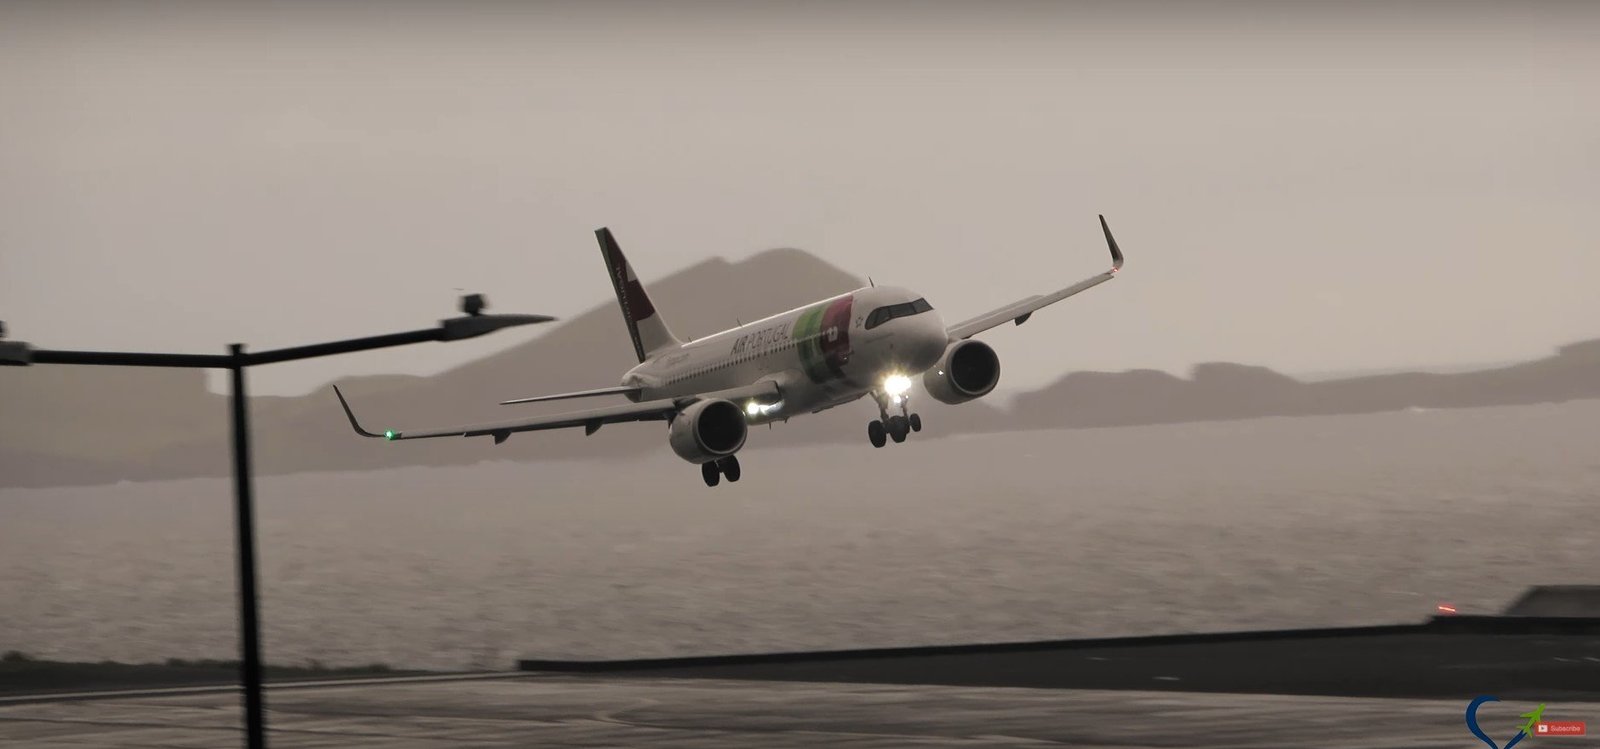 5 Difficult Landings at Madeira Airport